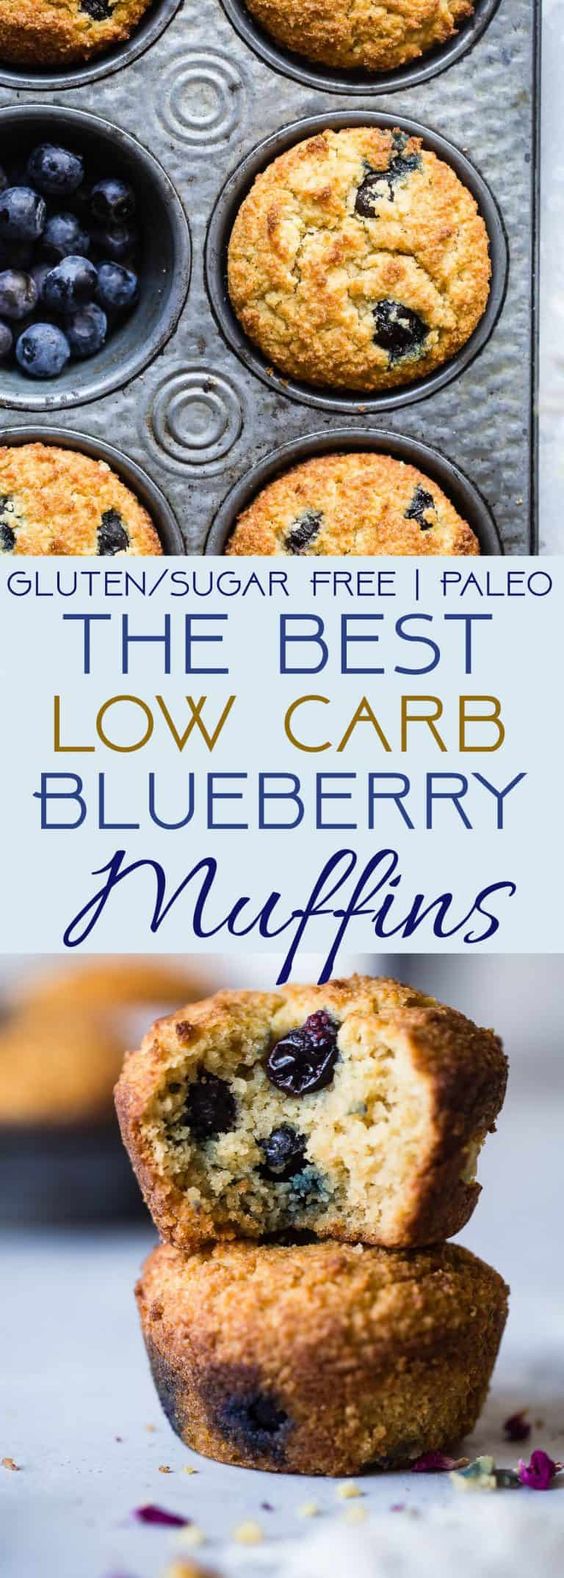 The BEST Low Carb, Sugar Free Blueberry Muffins - SO moist and tender, you'll never believe they are gluten/grain/dairy/sugar free and keto friendly! Perfect for breakfast or snacks for kids OR adults! | #Foodfaithfitness | #Lowcarb #Healthy #Glutenfree #Keto #Sugarfree